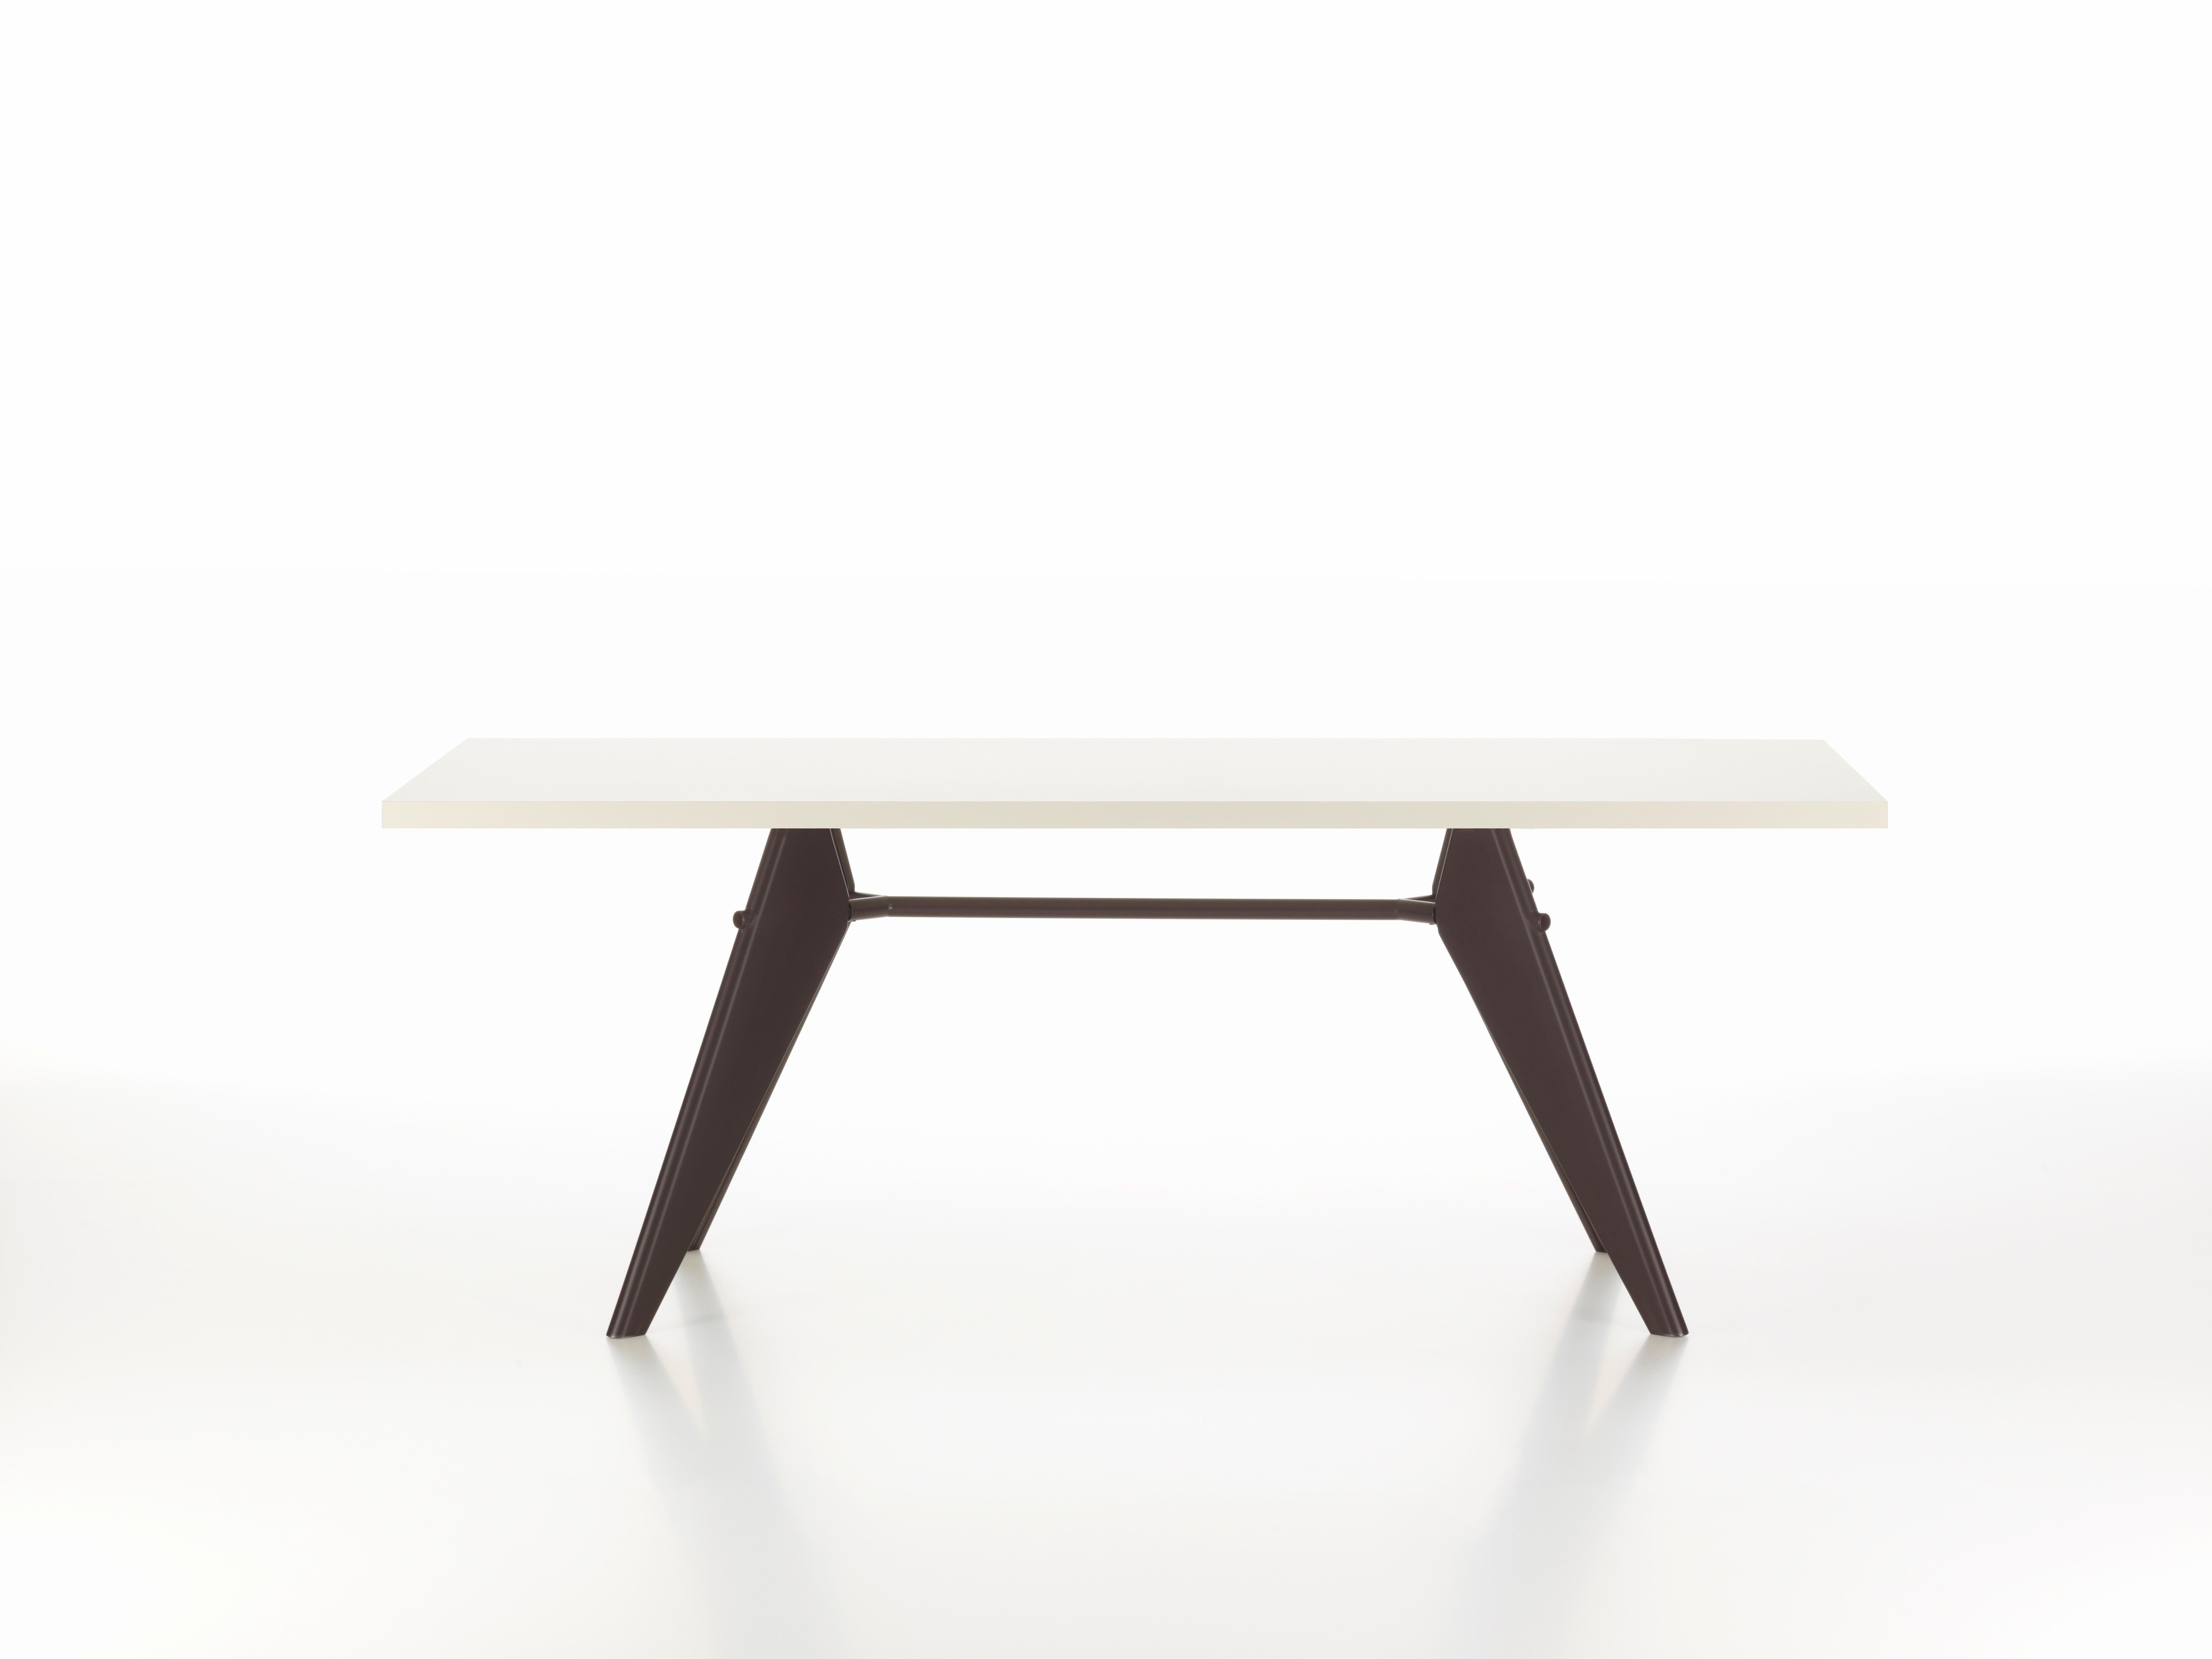 These items are currently only available in the United States.

The aesthetic appearance of Jean Prouvé's EM table adheres to structural principles, illustrating the flow of forces and stresses in its construction. It comes in a range of sizes with